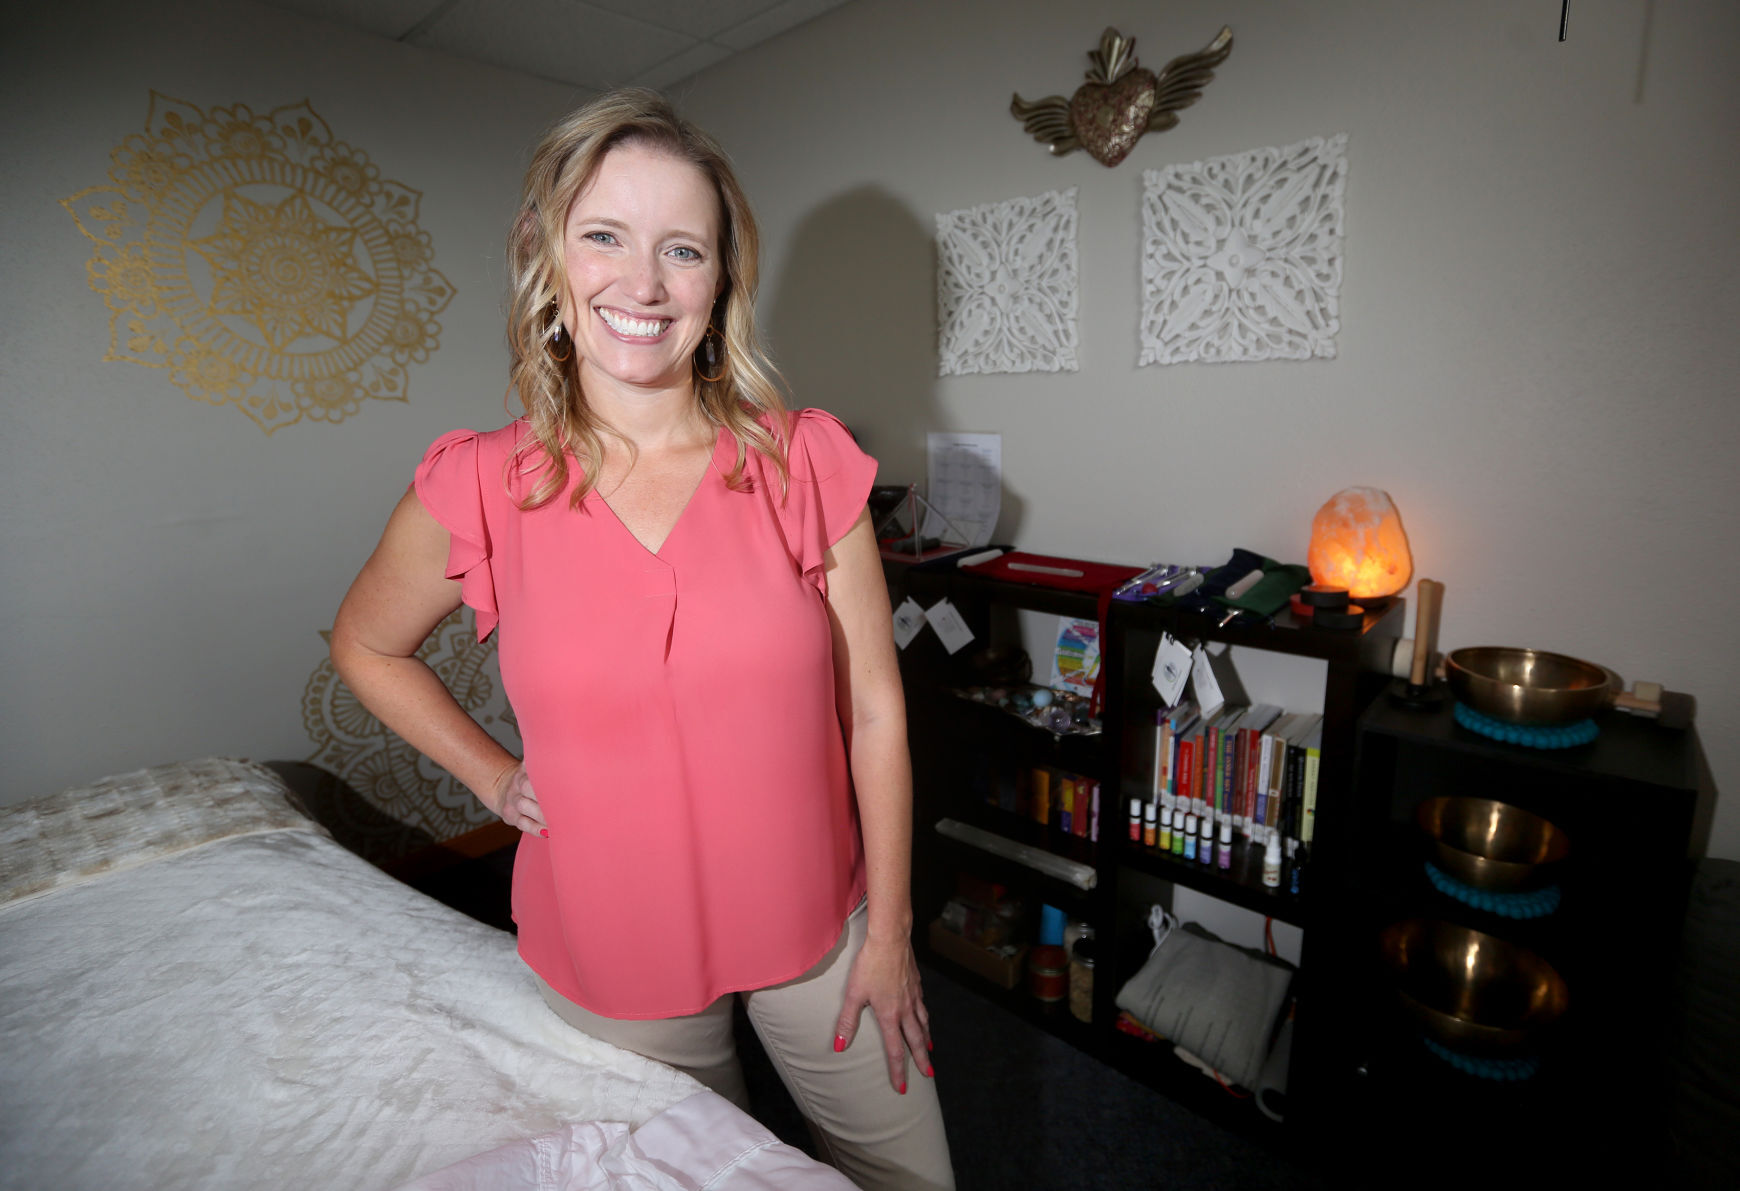 Rachel Harwood is the owner of Perfect Zen in Dubuque. The business offers a variety of healing, meditation and massage therapies. PHOTO CREDIT: JESSICA REILLY